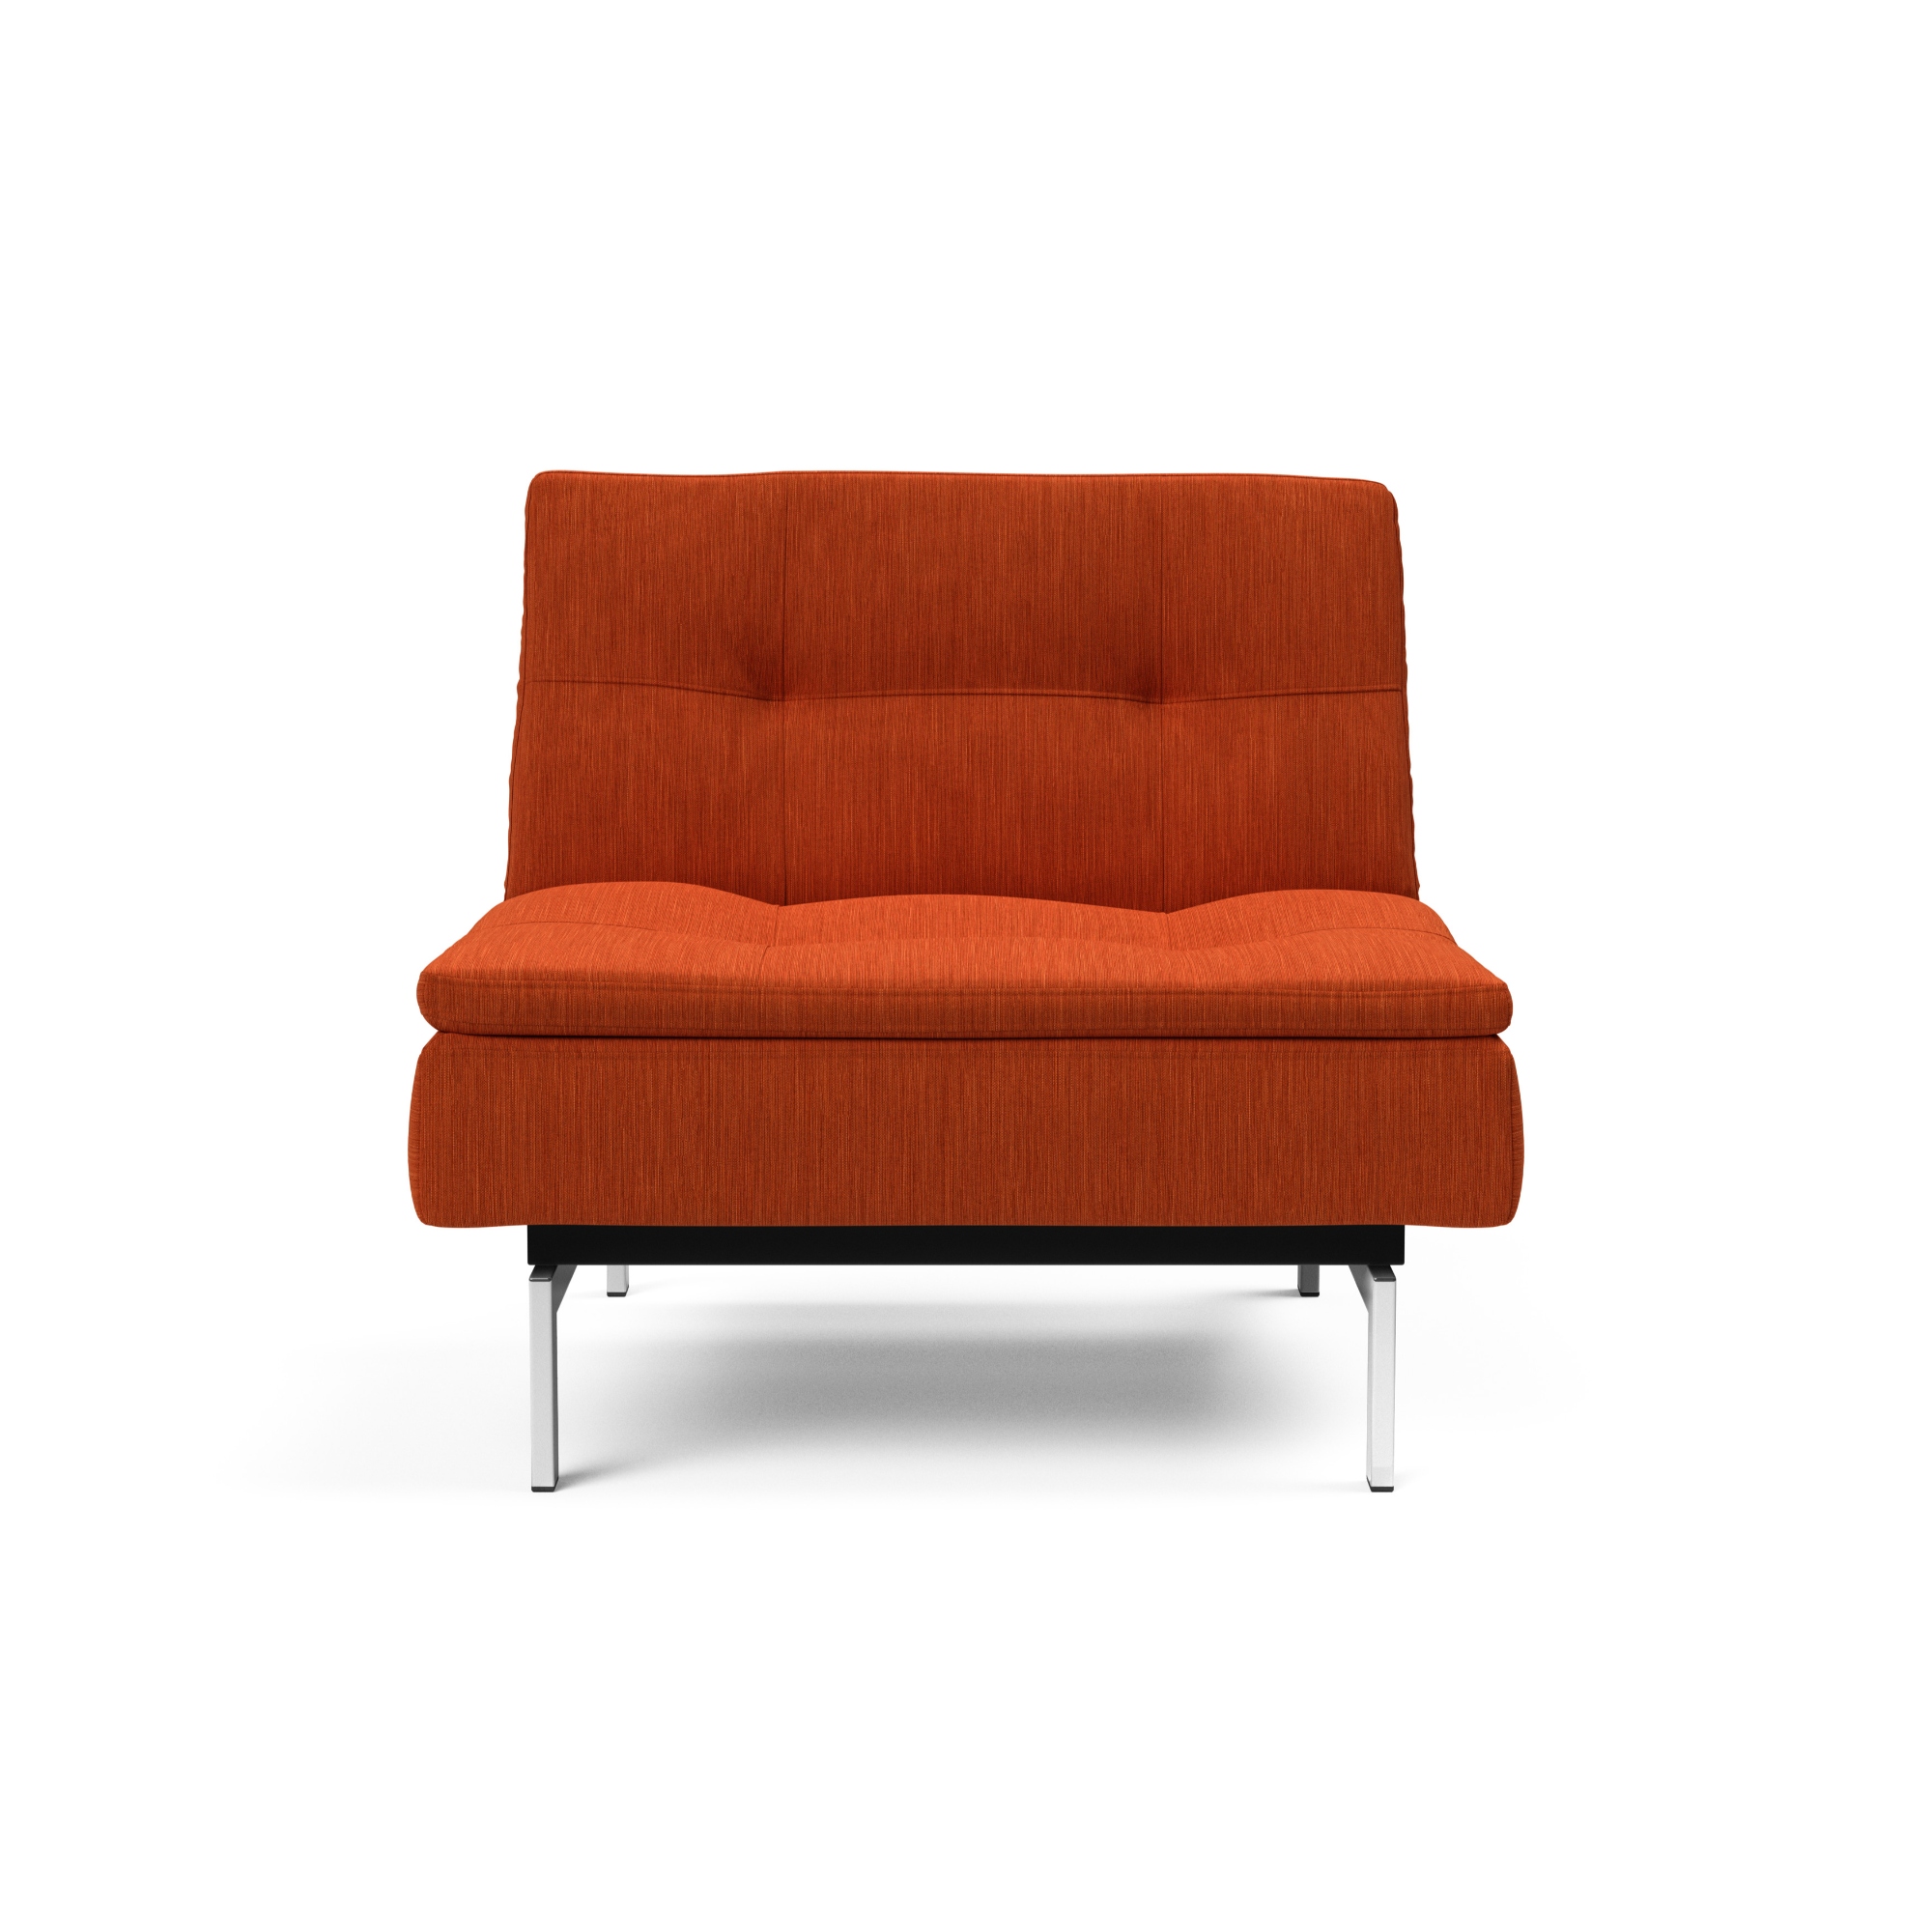 Dublexo Reclining Chair with Stainless Steel Legs in Elegance Paprika ...